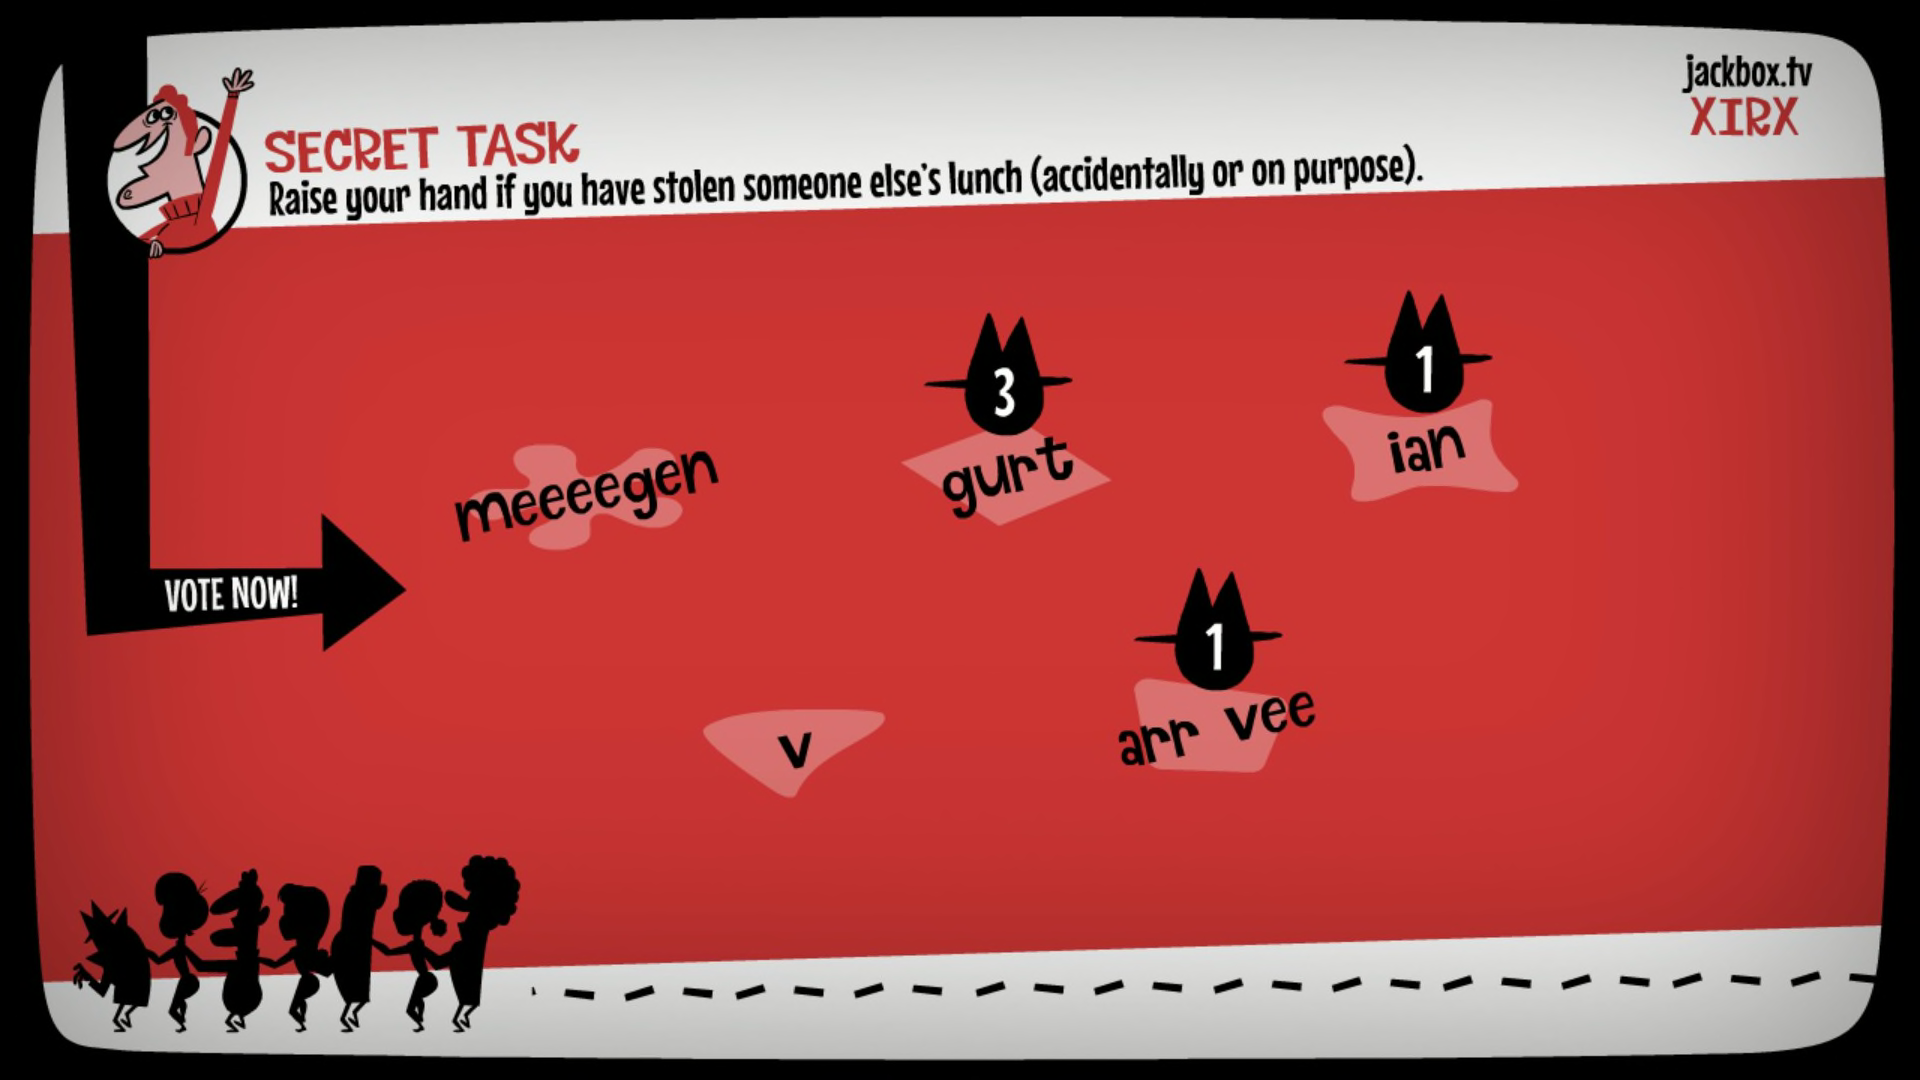 trivia murder party jackbox games questions answers